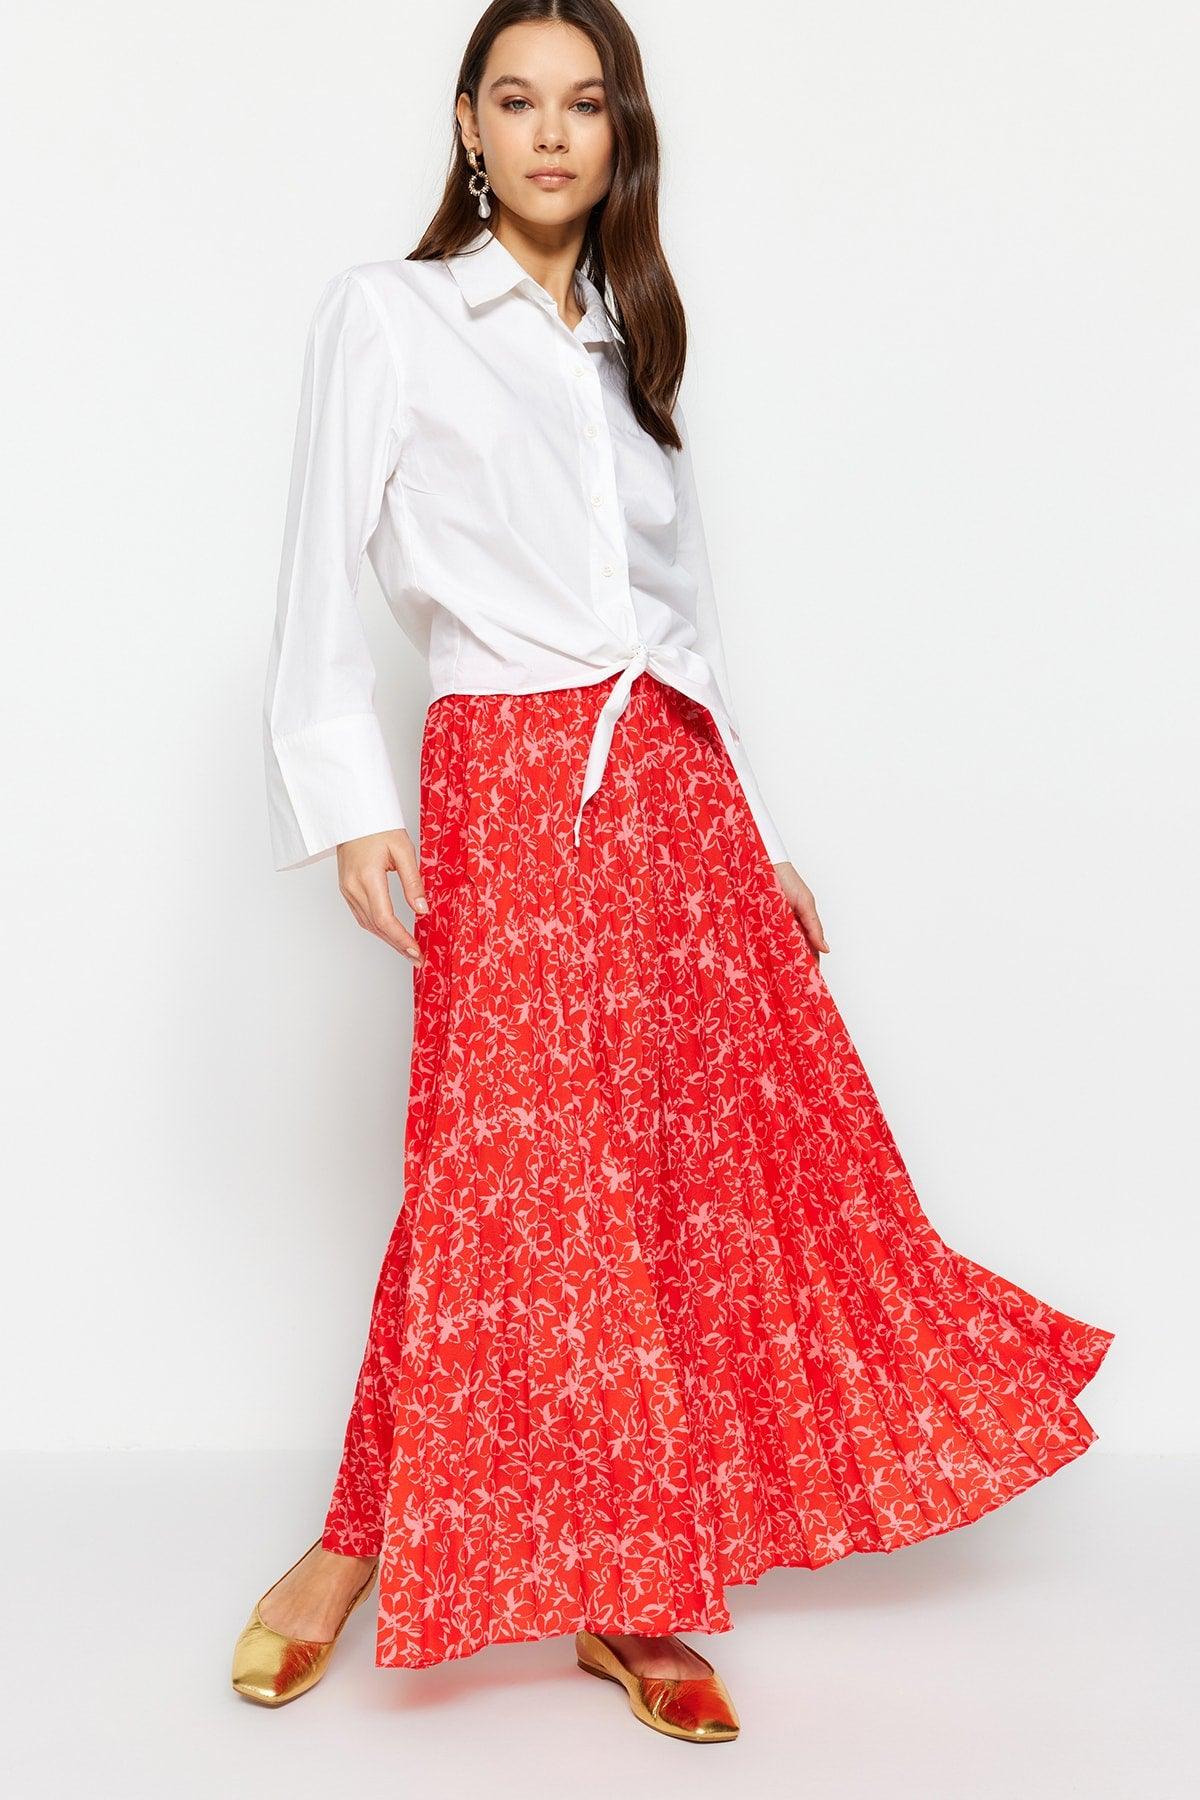 Red Floral Patterned Pleated Elastic Waist Knitted Skirt TCTSS23EE00018 - Swordslife